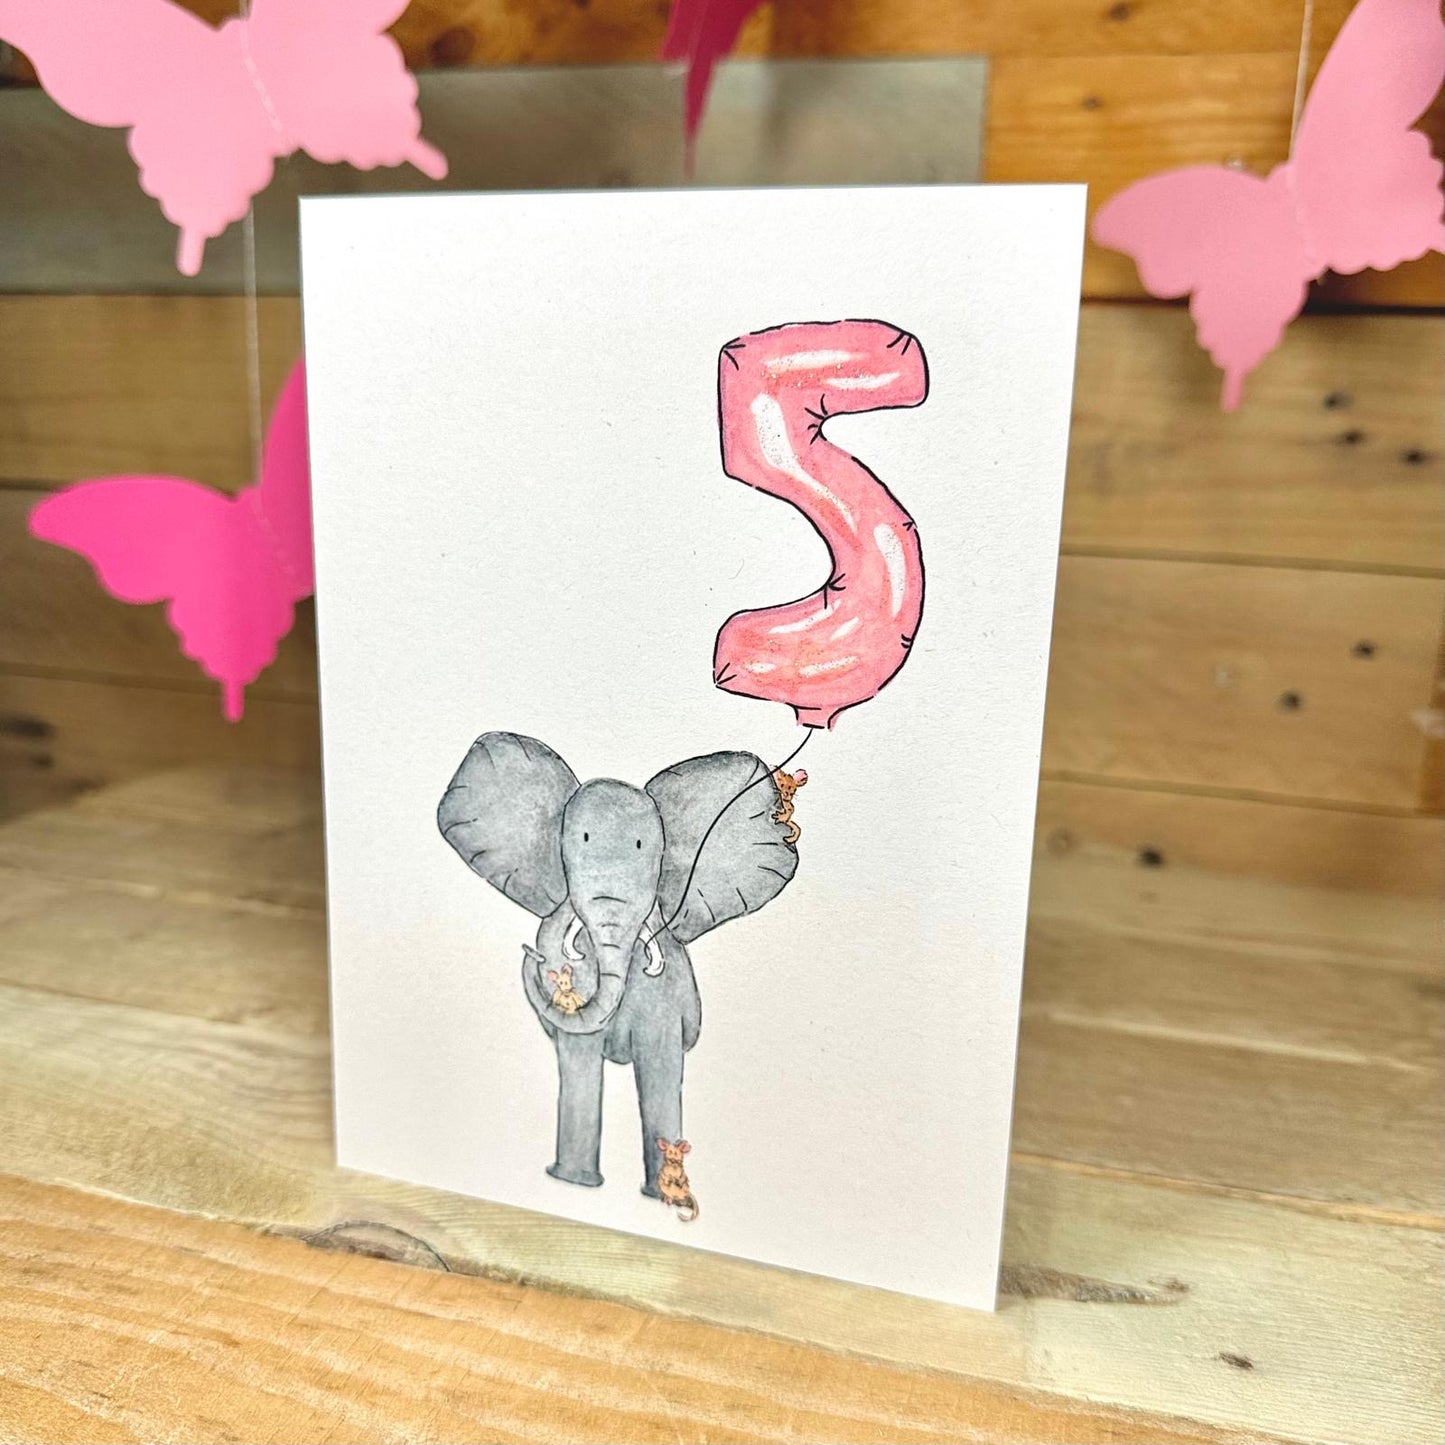 Nelly Turns Five Birthday Card